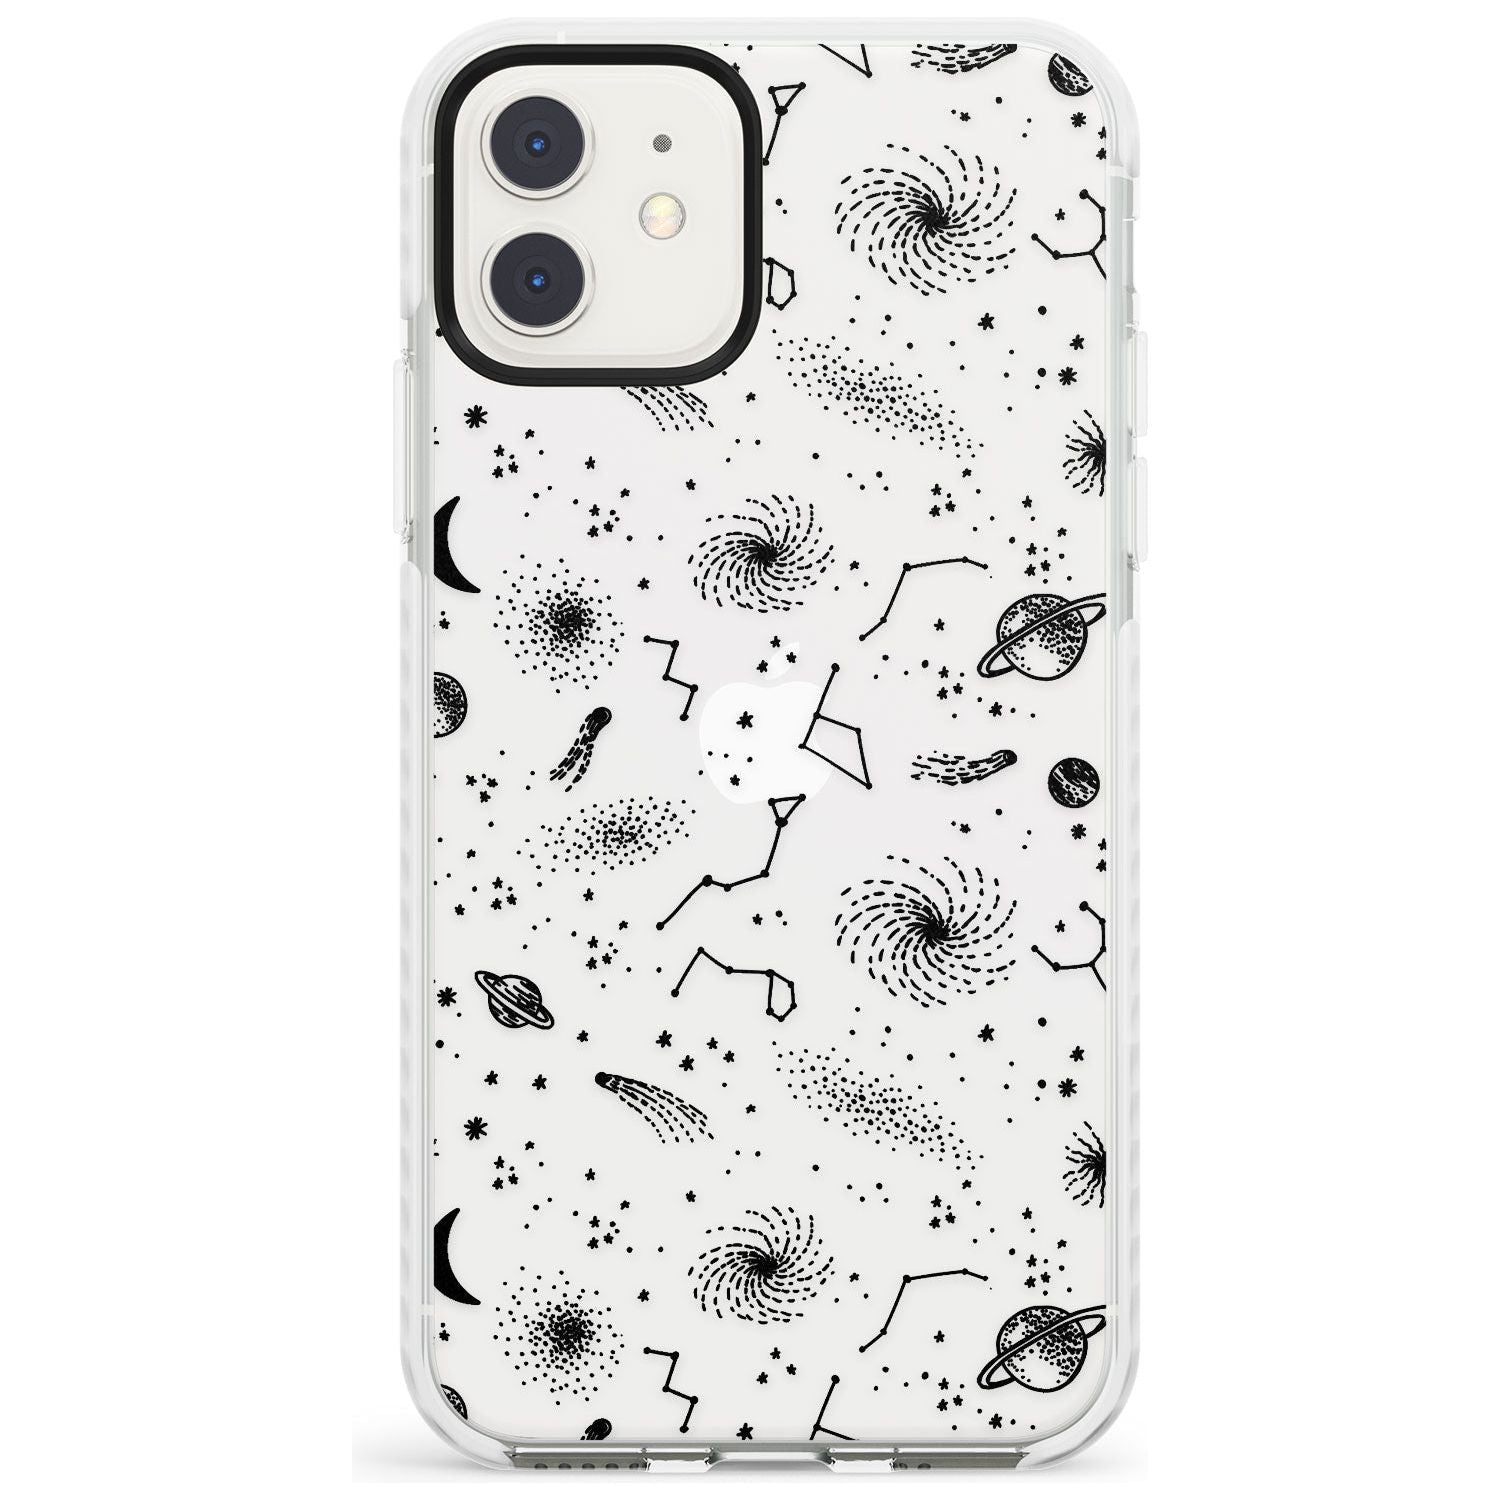 Mixed Galaxy Pattern Impact Phone Case for iPhone 11